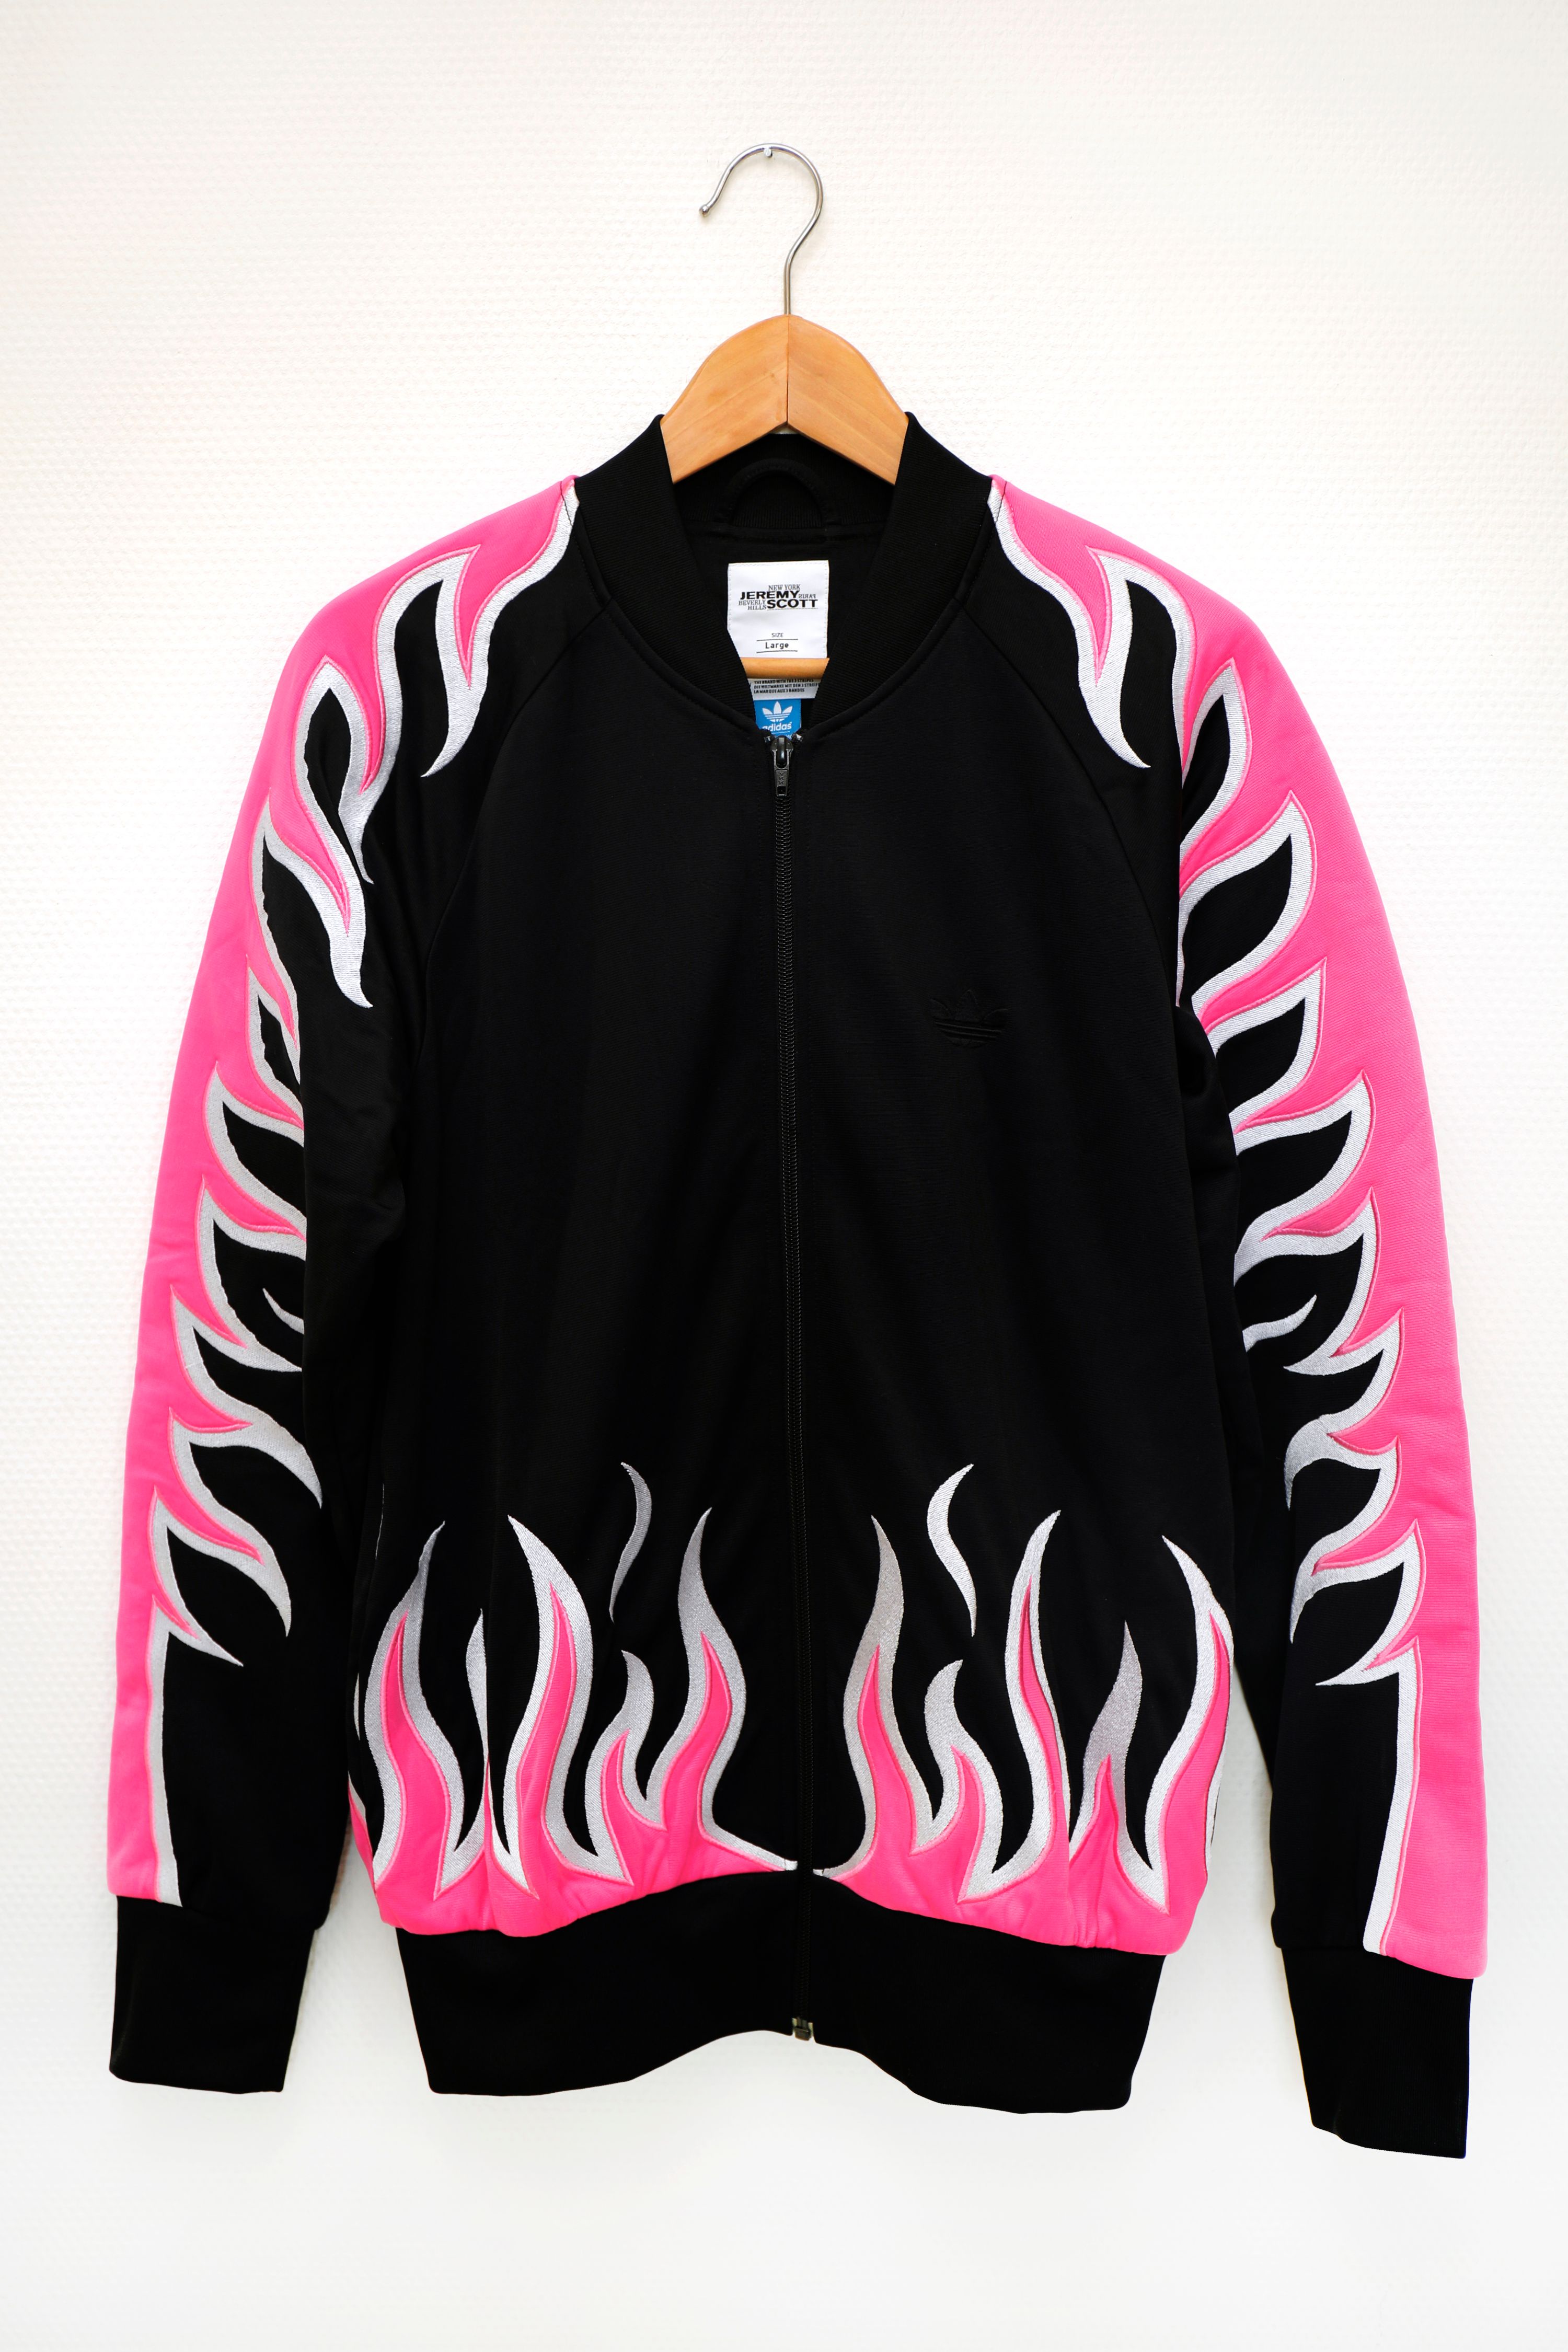 Pre-owned Adidas X Jeremy Scott Bombers Jacket Flame Fire Jeremy Scott For Adidas In Rose